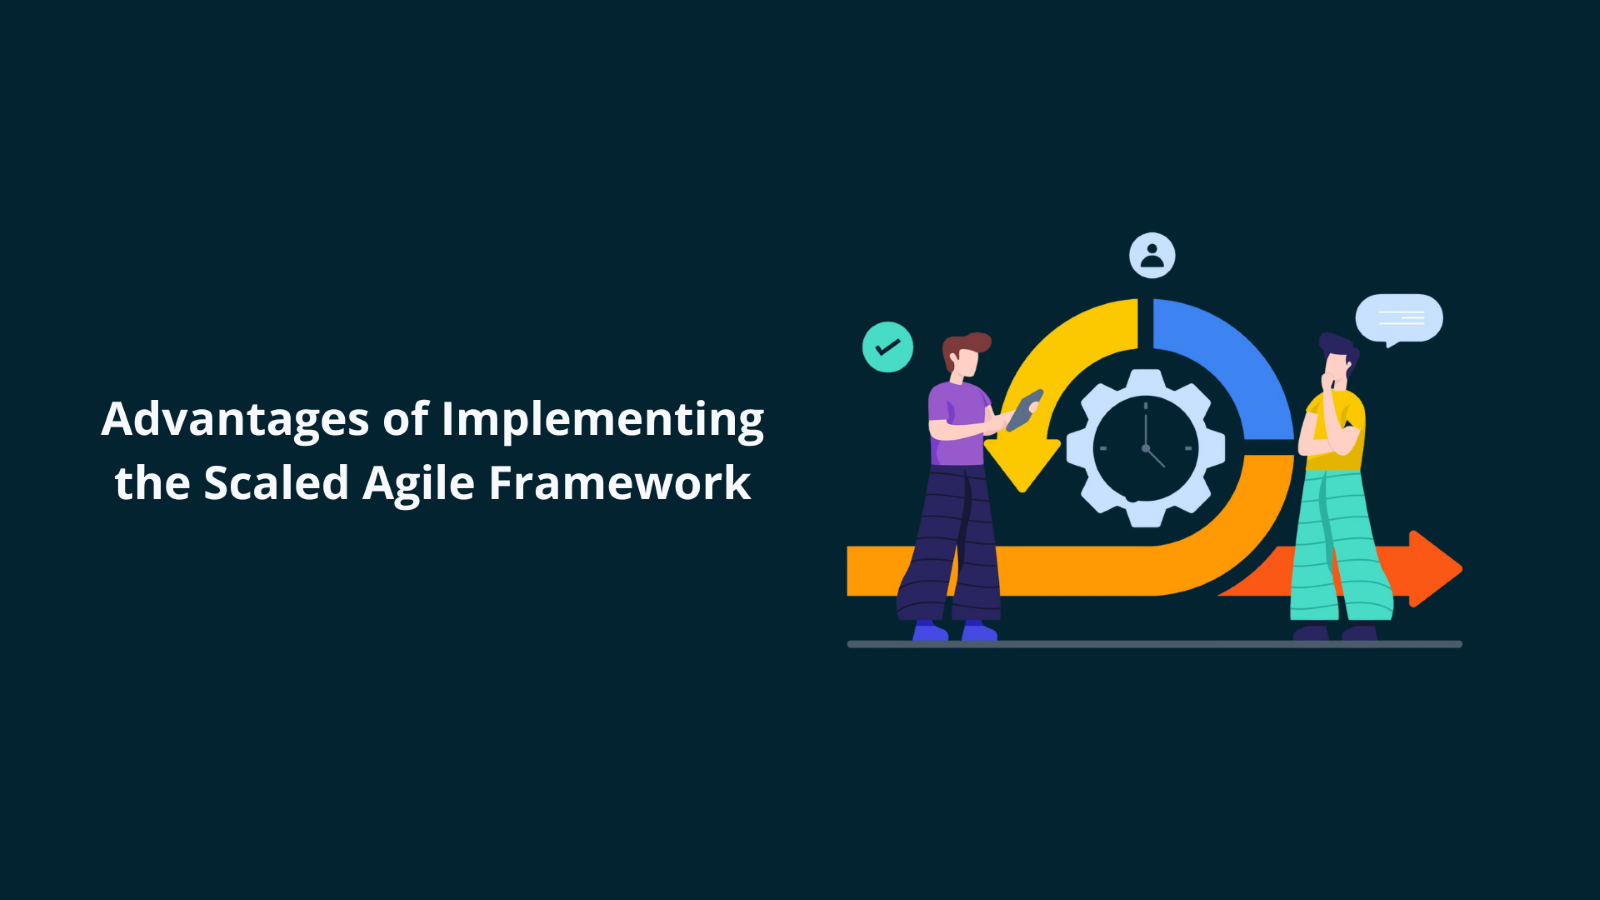 Advantages of Implementing the Scaled Agile Framework